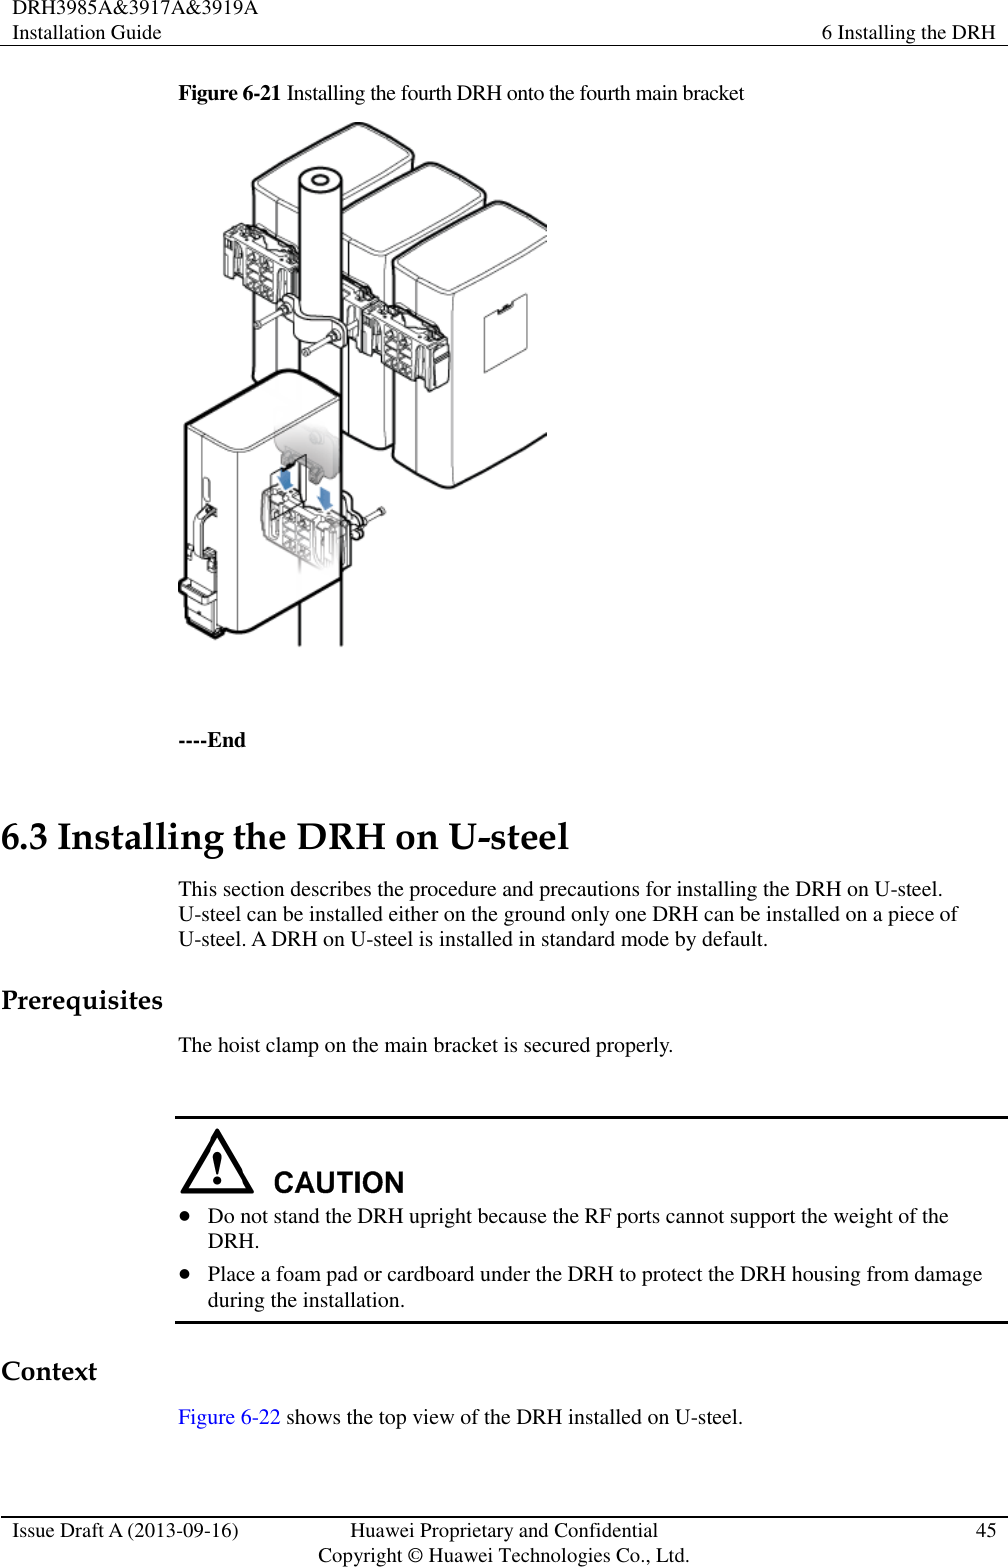 DRH3985A&amp;3917A&amp;3919A Installation Guide 6 Installing the DRH  Issue Draft A (2013-09-16) Huawei Proprietary and Confidential                                     Copyright © Huawei Technologies Co., Ltd. 45  Figure 6-21 Installing the fourth DRH onto the fourth main bracket   ----End 6.3 Installing the DRH on U-steel This section describes the procedure and precautions for installing the DRH on U-steel. U-steel can be installed either on the ground only one DRH can be installed on a piece of U-steel. A DRH on U-steel is installed in standard mode by default. Prerequisites The hoist clamp on the main bracket is secured properly.    Do not stand the DRH upright because the RF ports cannot support the weight of the DRH.  Place a foam pad or cardboard under the DRH to protect the DRH housing from damage during the installation. Context Figure 6-22 shows the top view of the DRH installed on U-steel.  